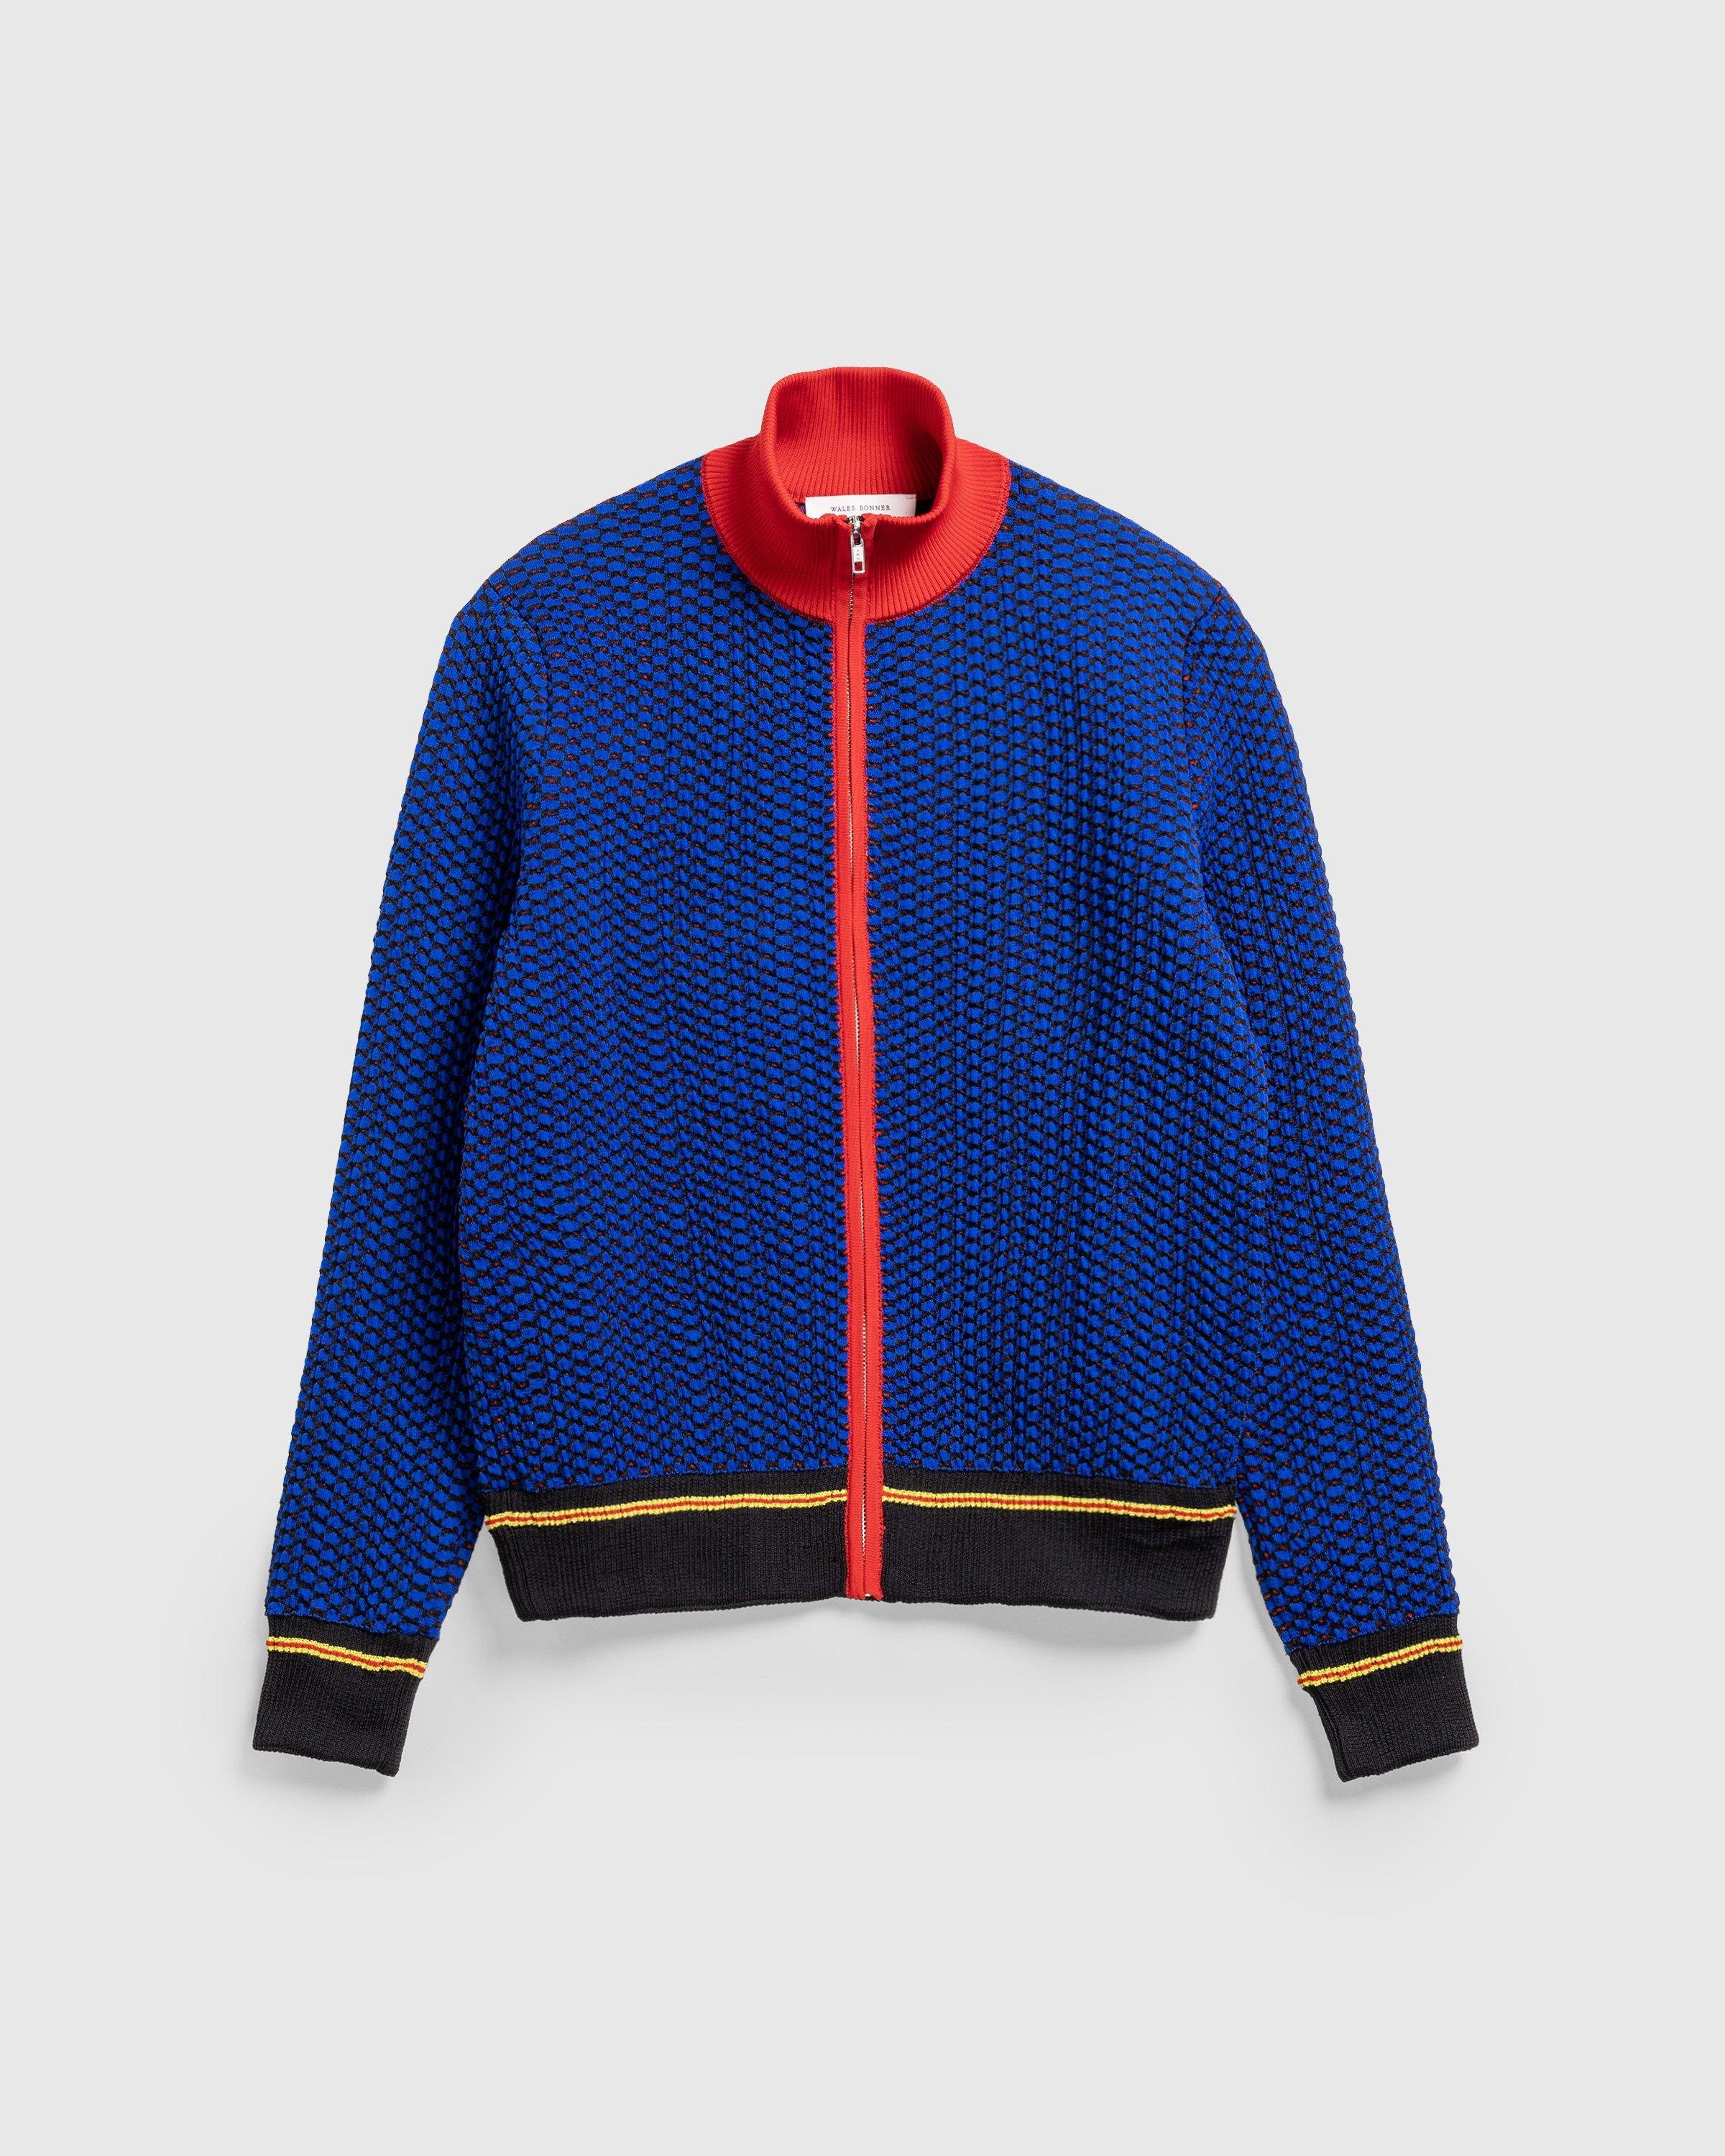 Wales BonnerJacquard Full-Zip Top Navy/Red/Yellow by HIGHSNOBIETY